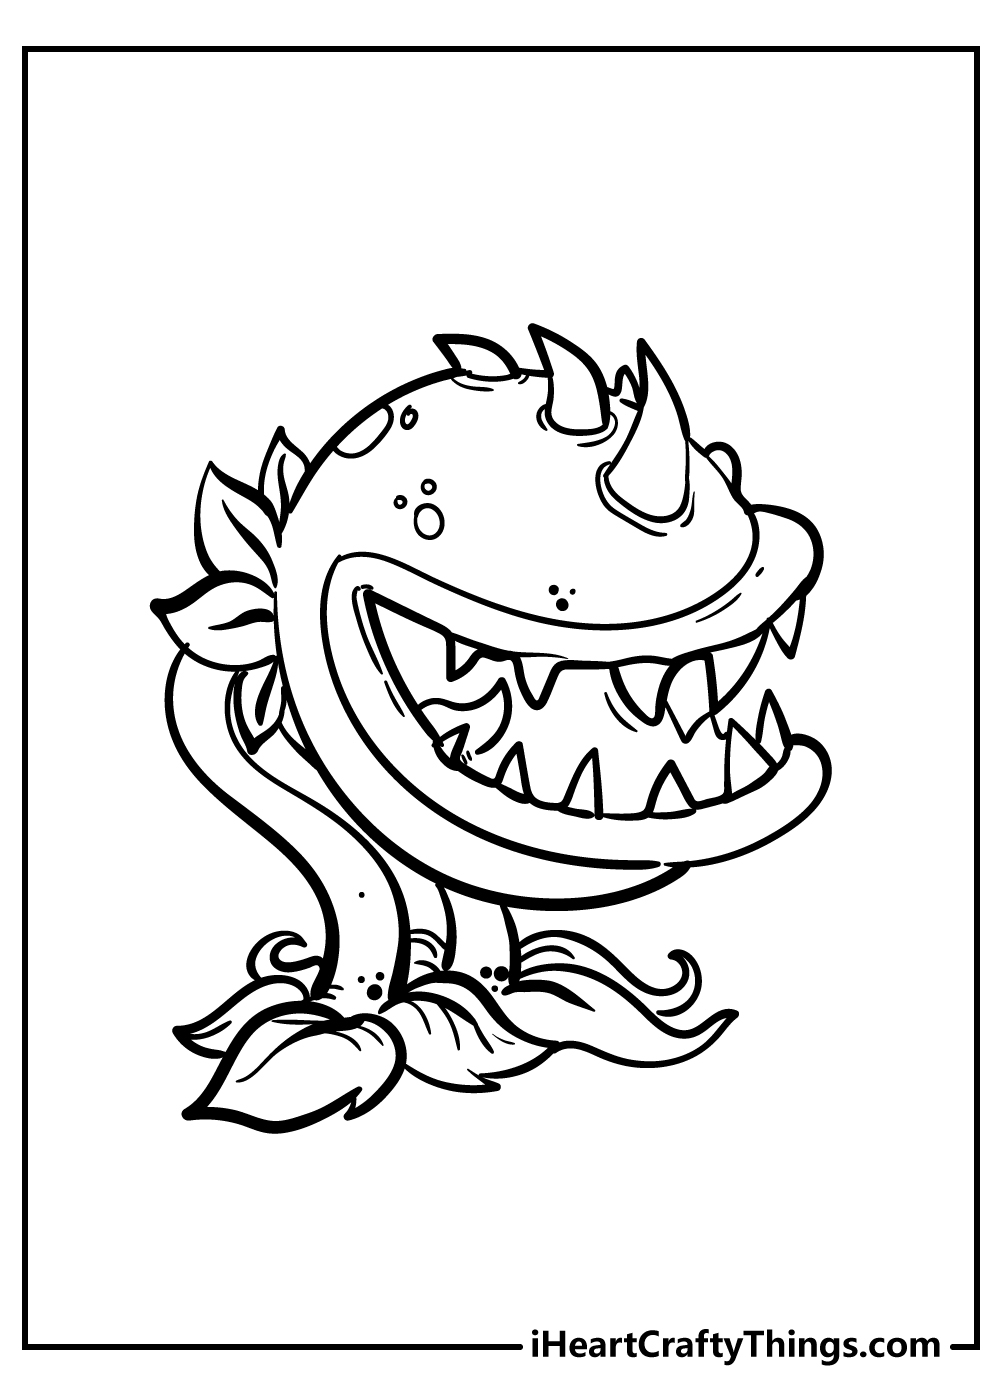 Plants Vs. Zombies Easy Coloring Pages